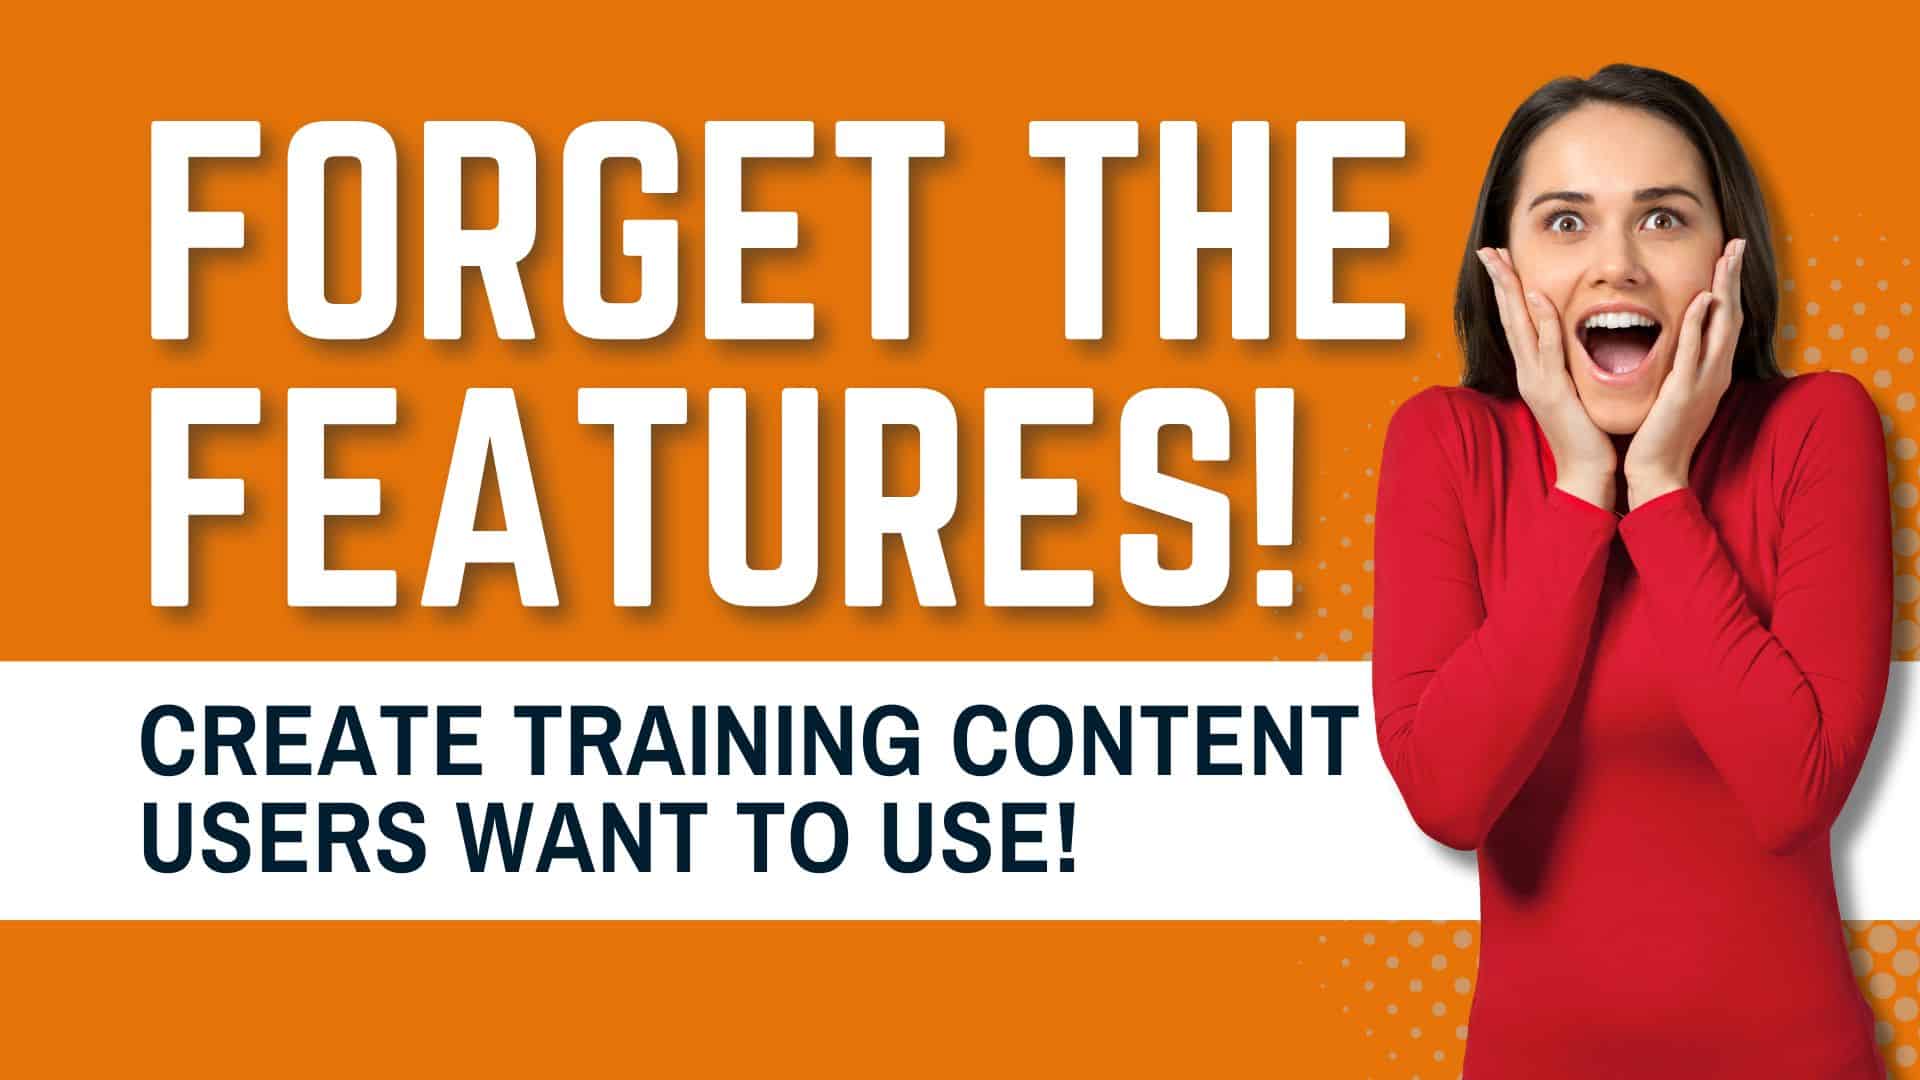 Learn how to create training materials that users actually want to use and increase user adoption with engaging, interactive content.